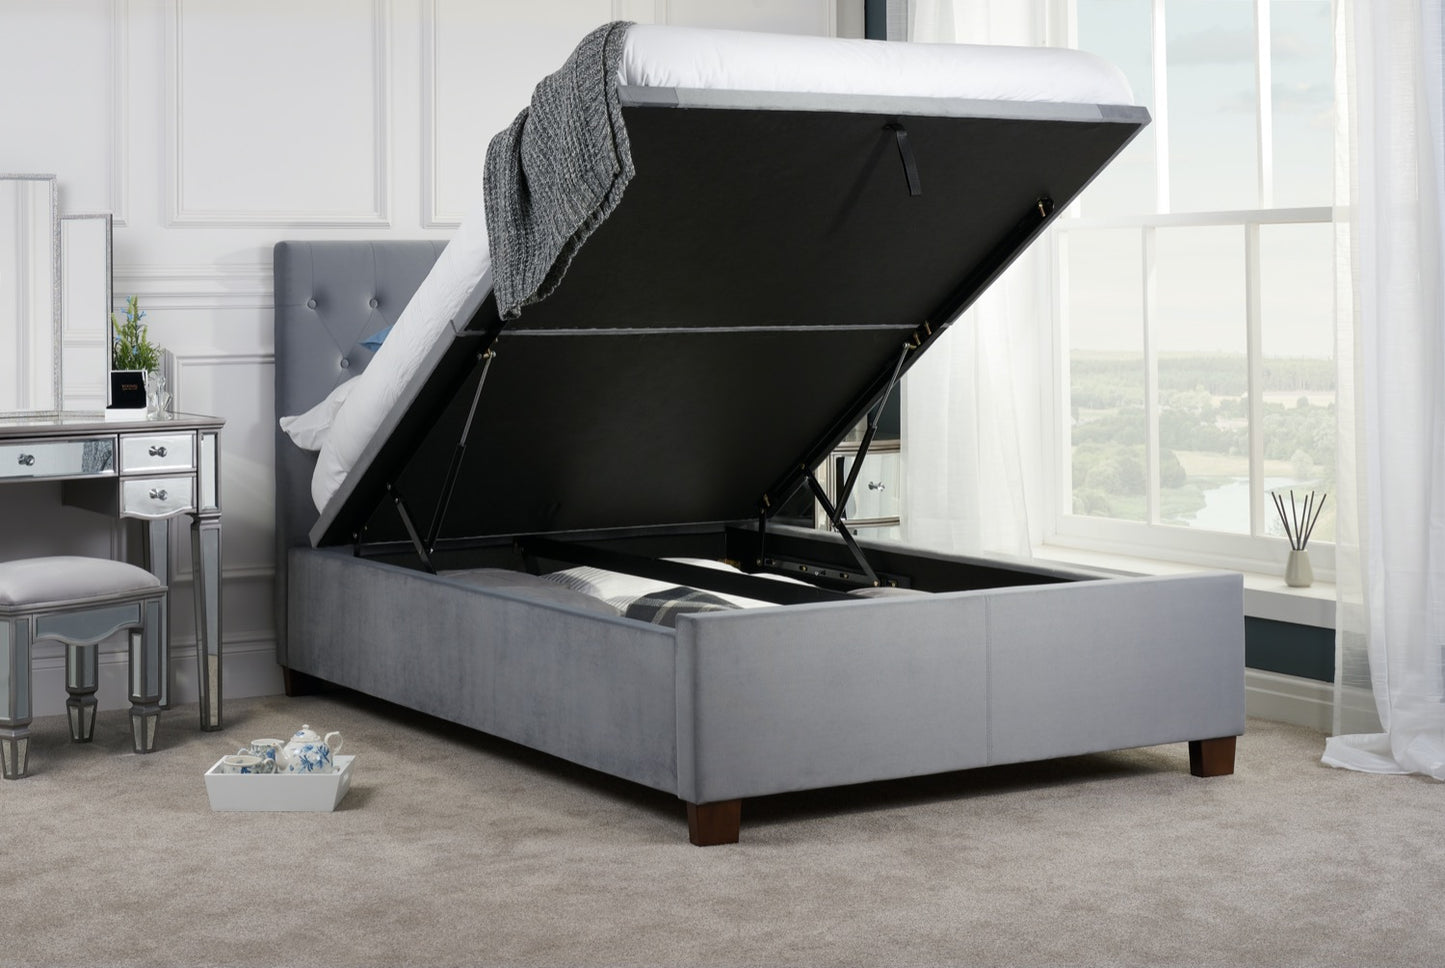 Cai Ottoman Double Bed - Grey